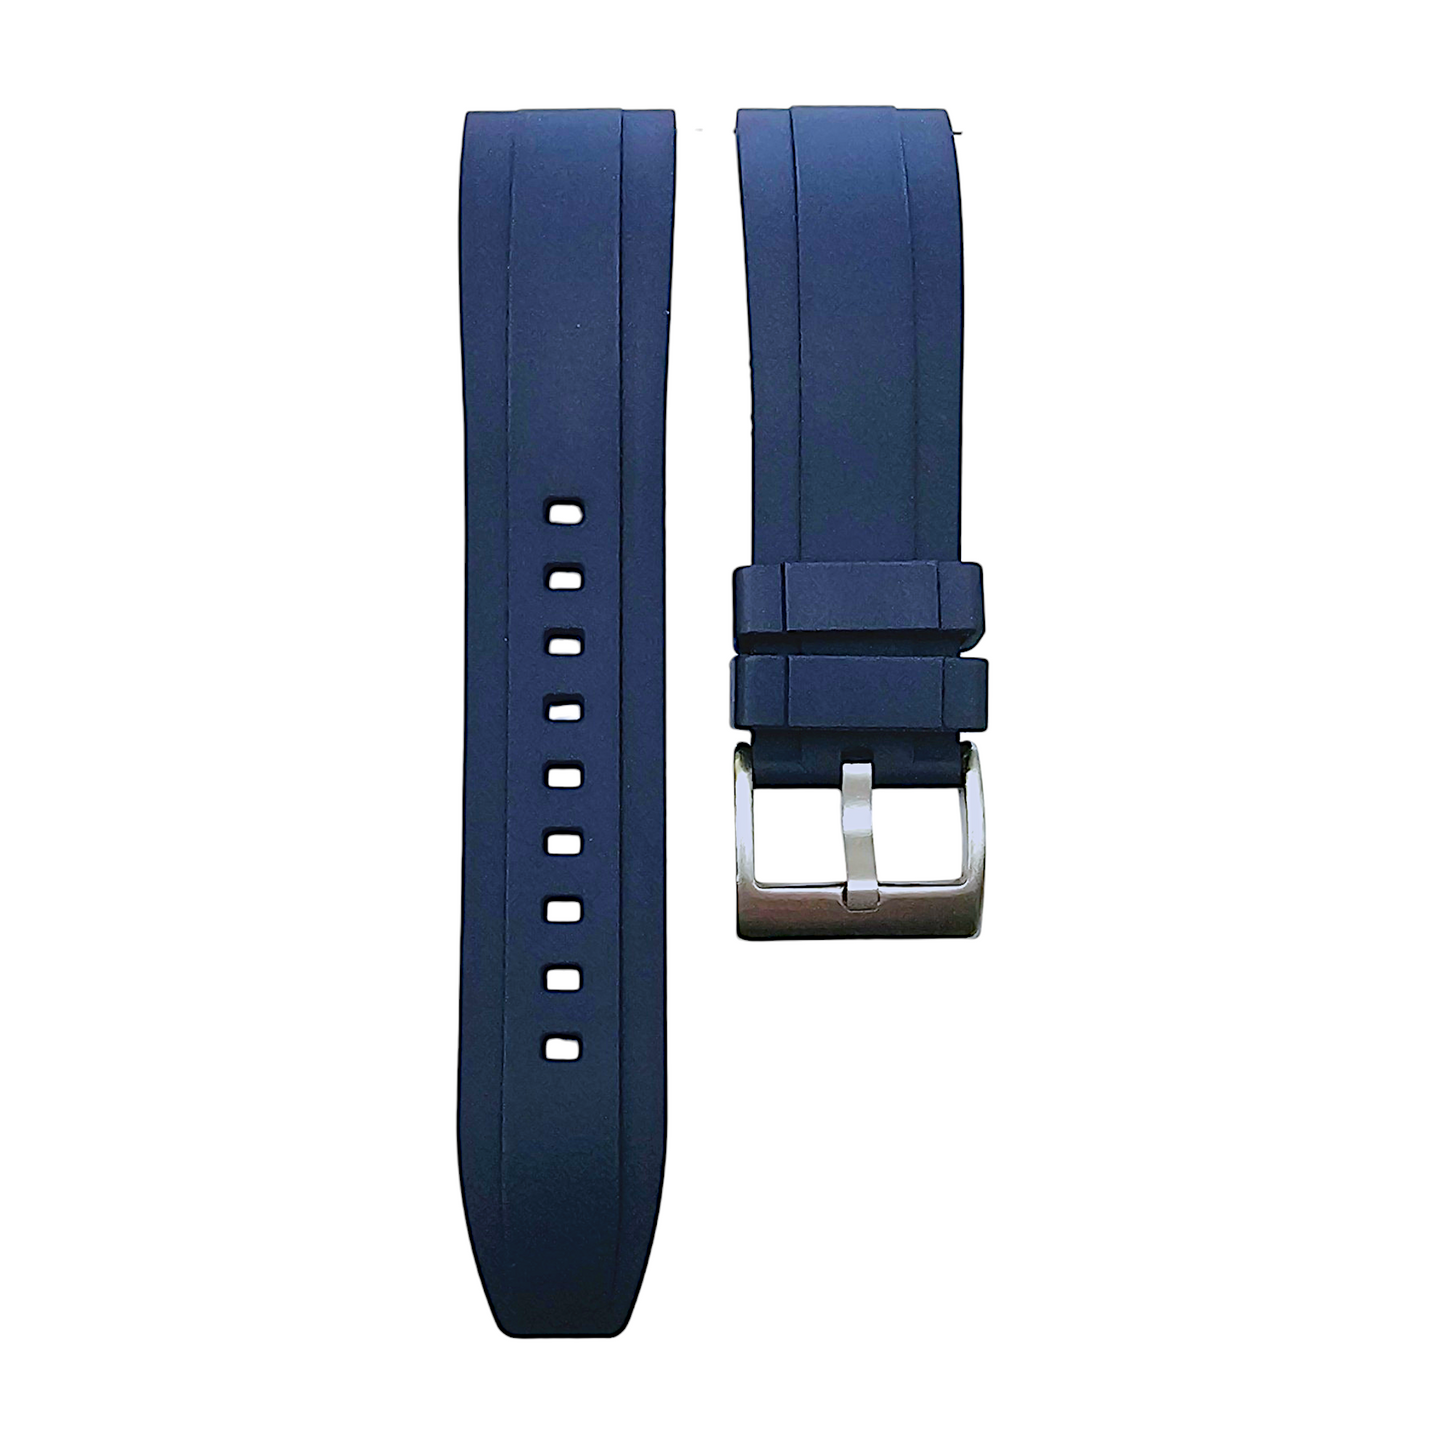 FKM Rubber Divers Watch Strap Band 20mm 22mm 24mm Blue